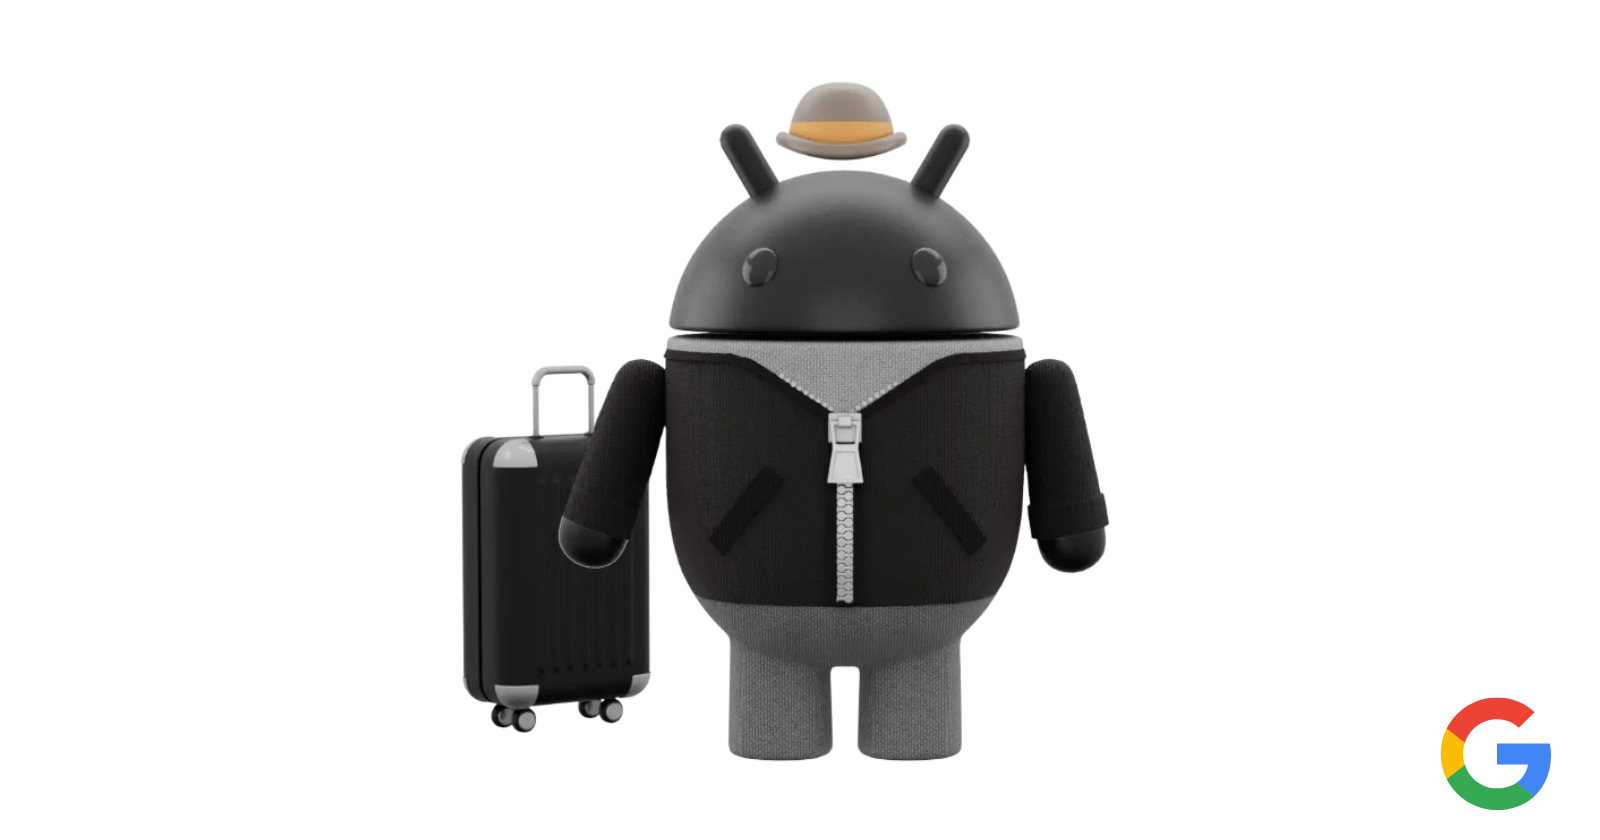 Steps to design a custom Android Bot avatar on your Pixel phone